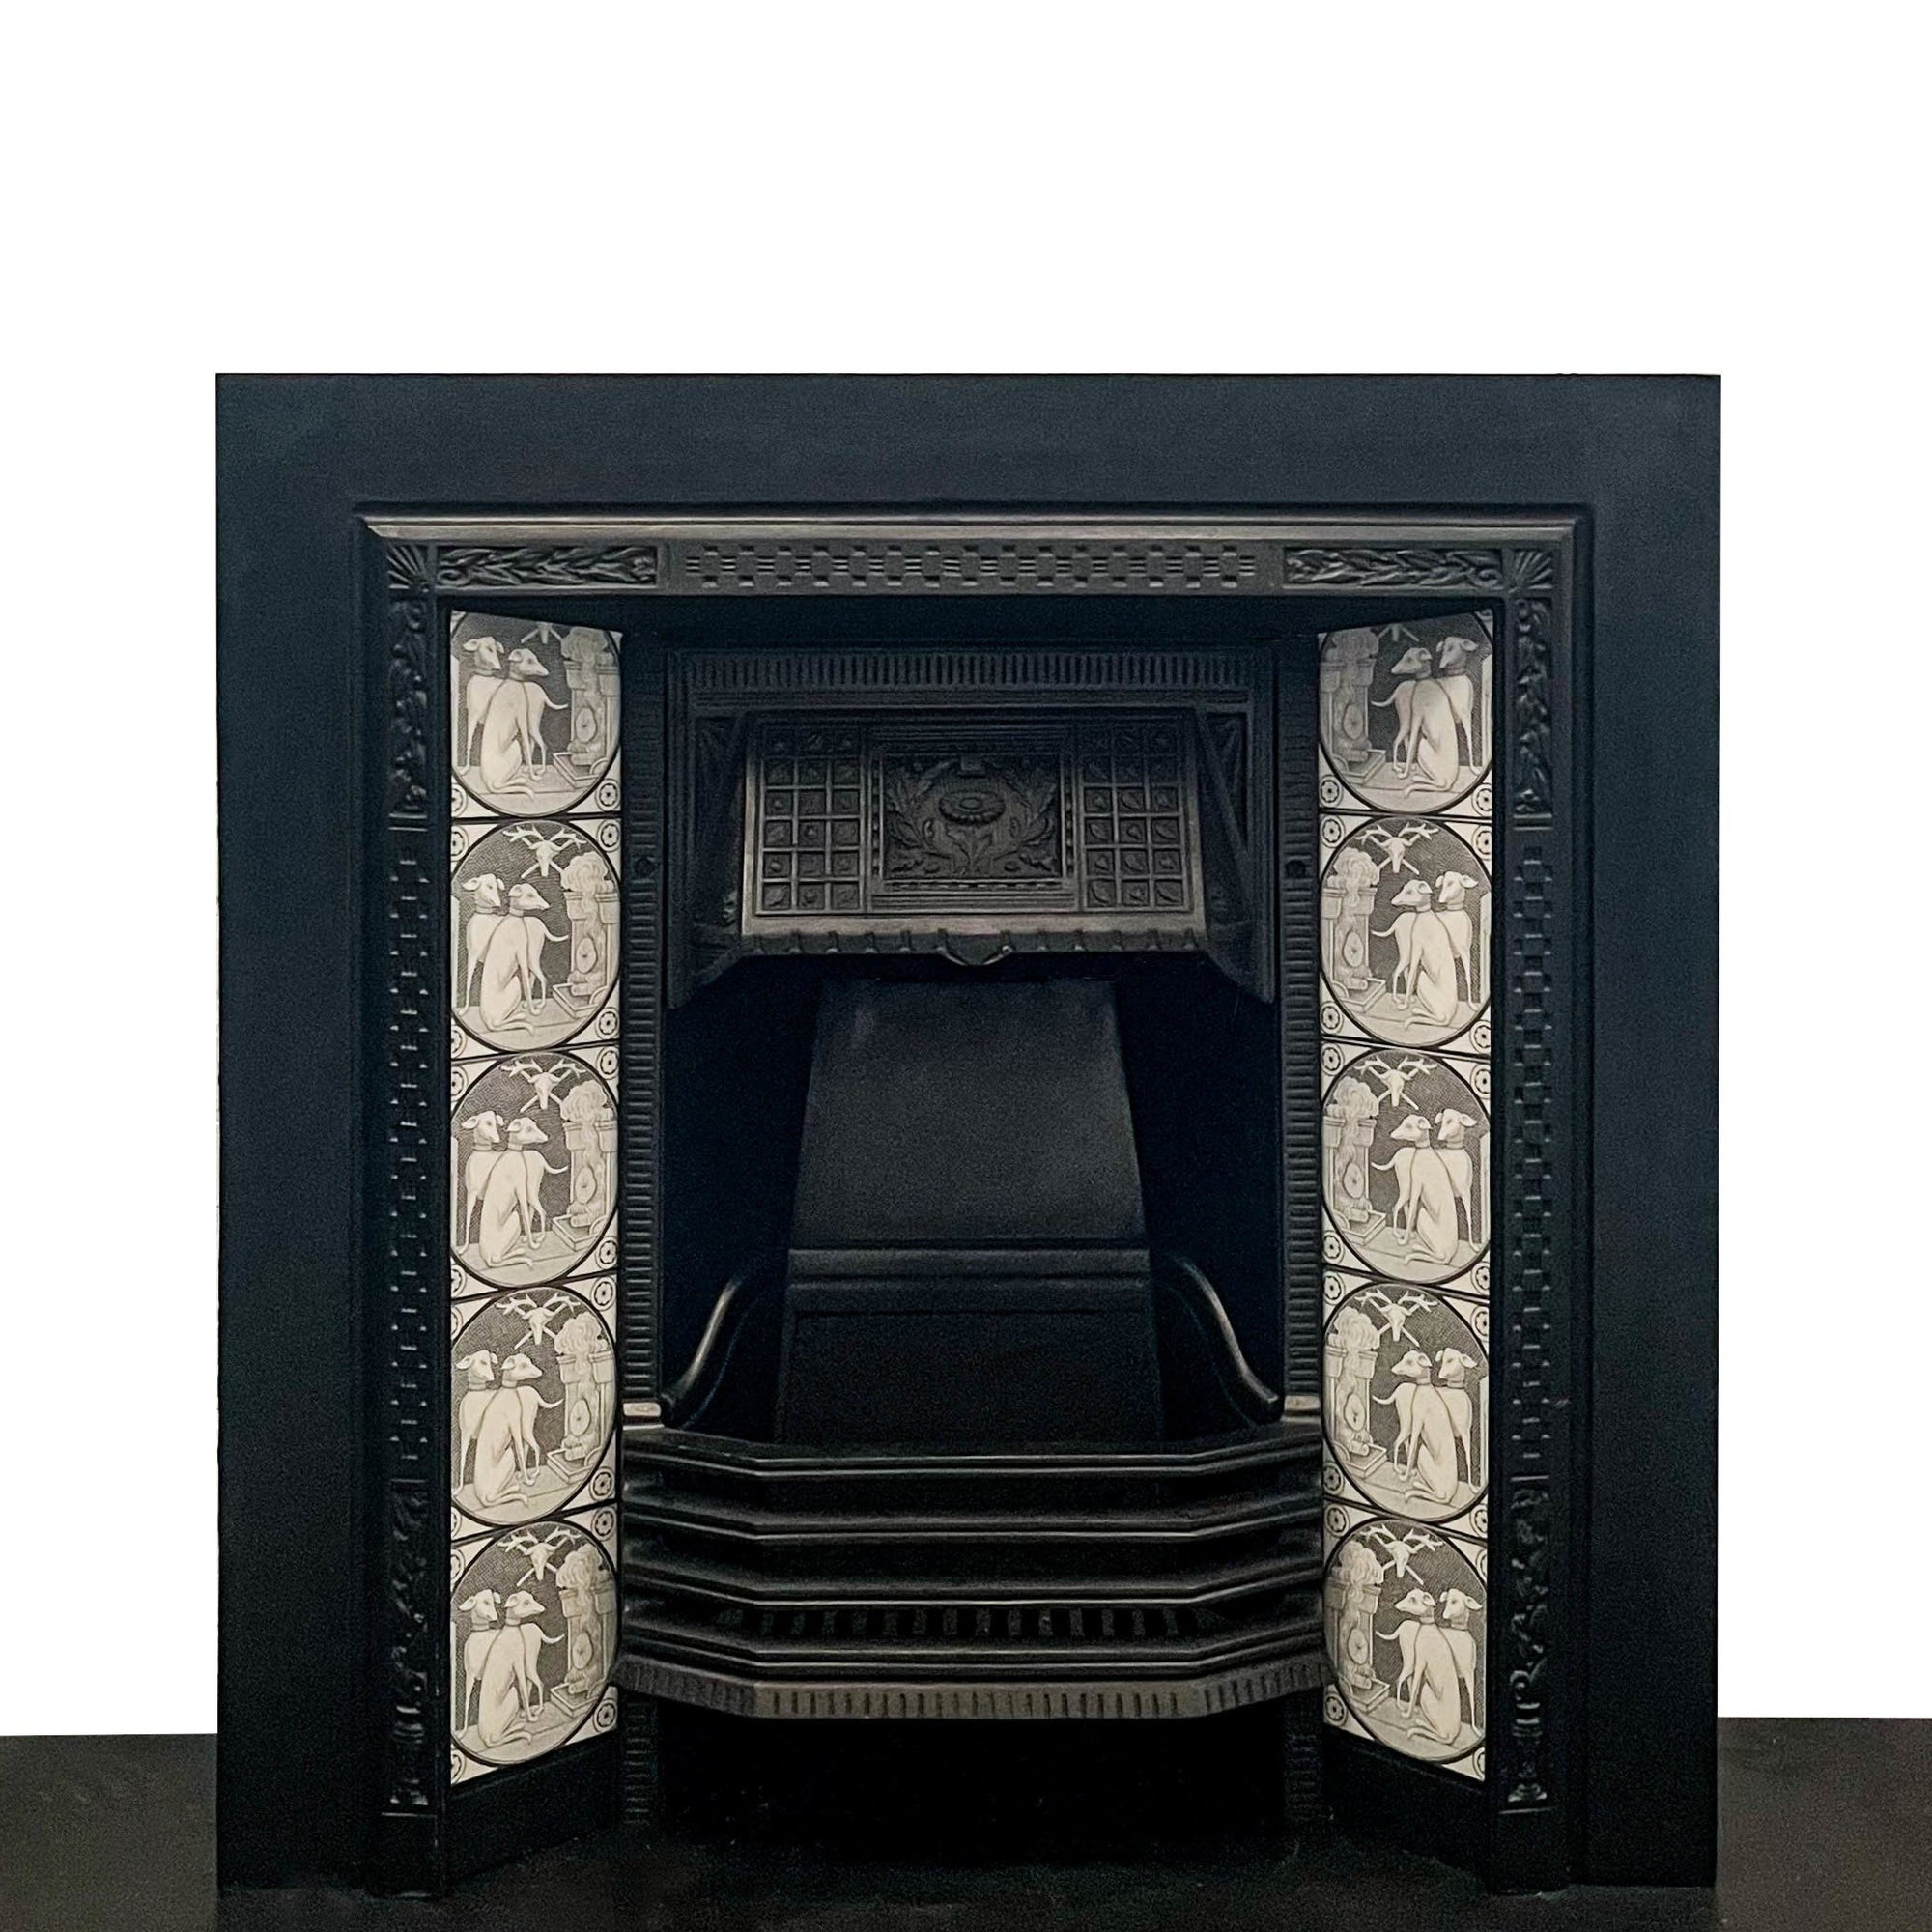 Antique Victorian Cast Iron Tiled Fireplace Insert | The Architectural Forum